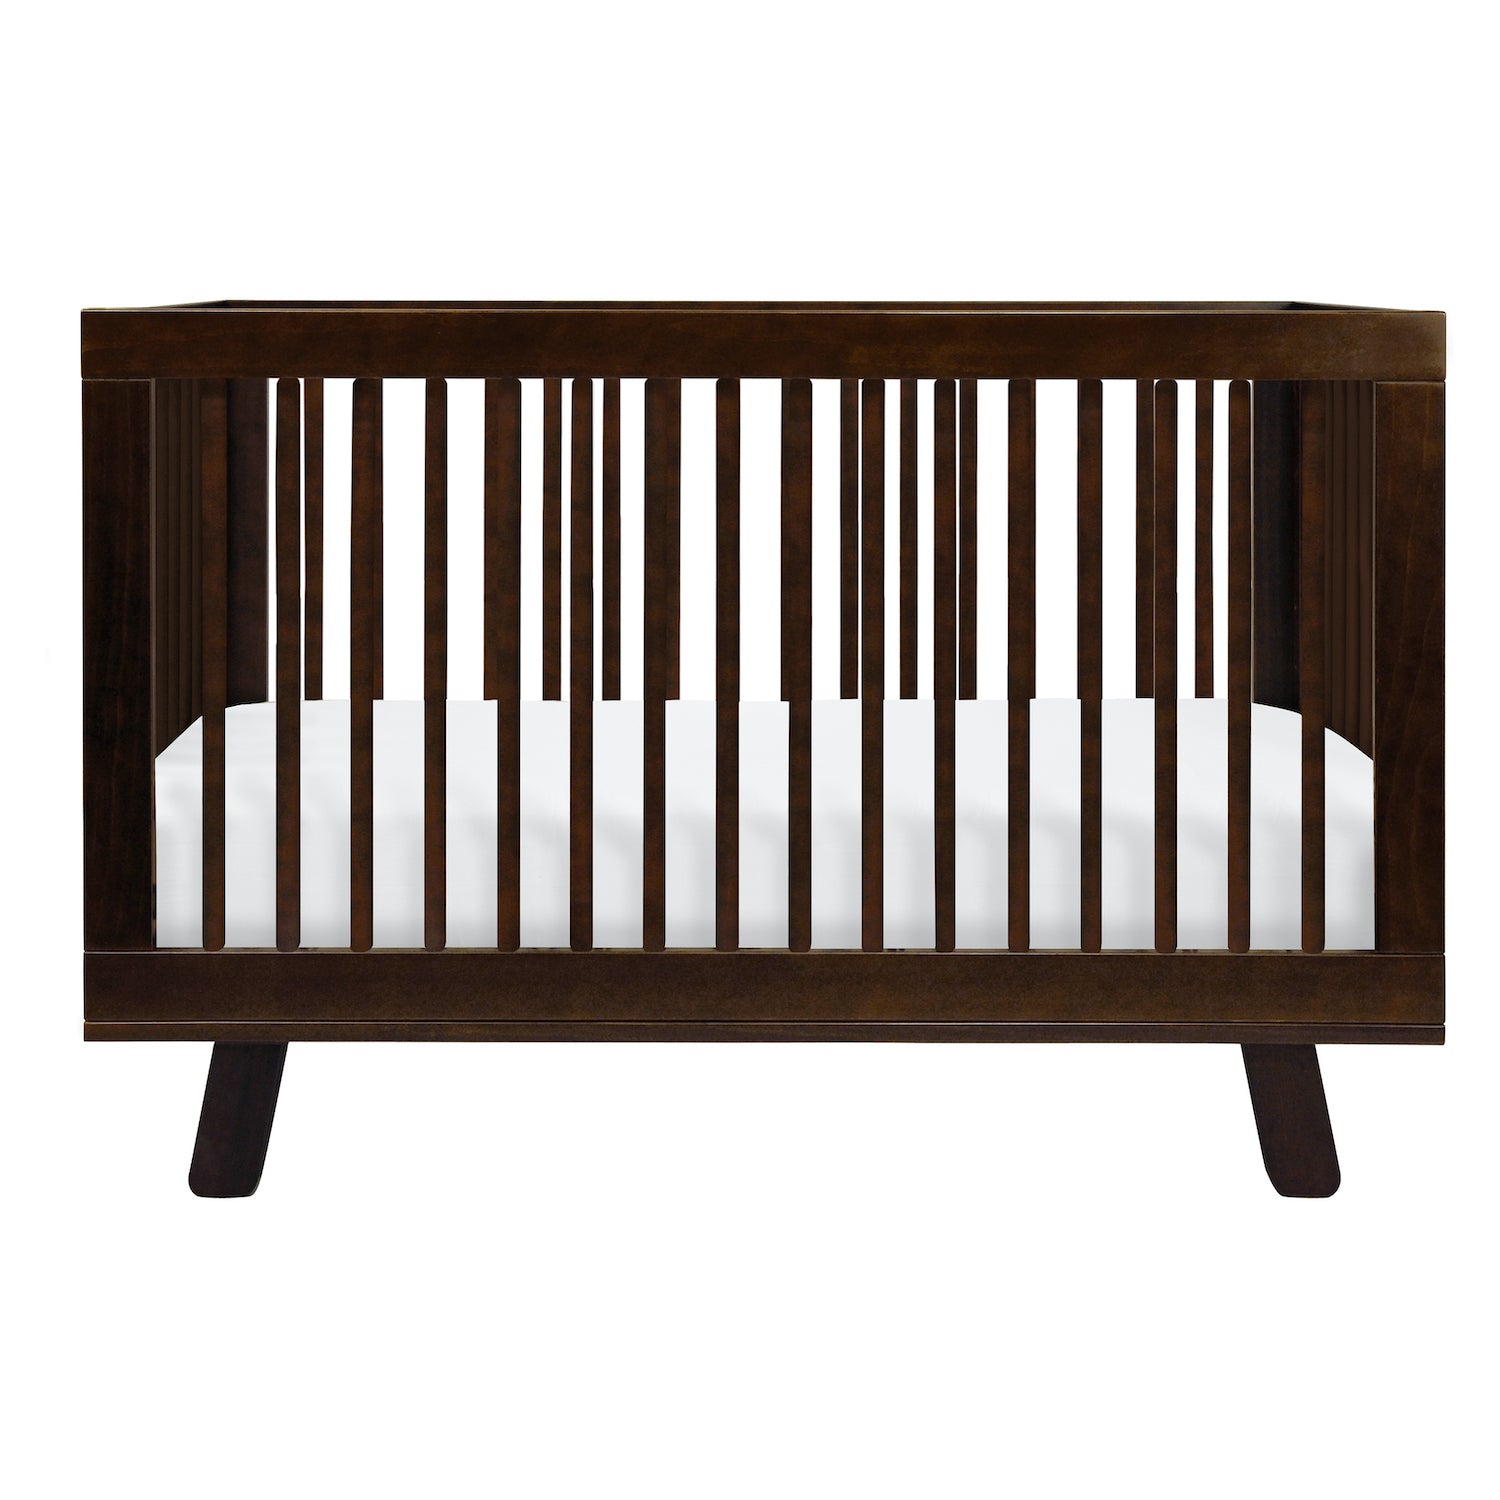 Hudson 3-in-1 Convertible Crib With Toddler Bed Conversion Kit - Espresso